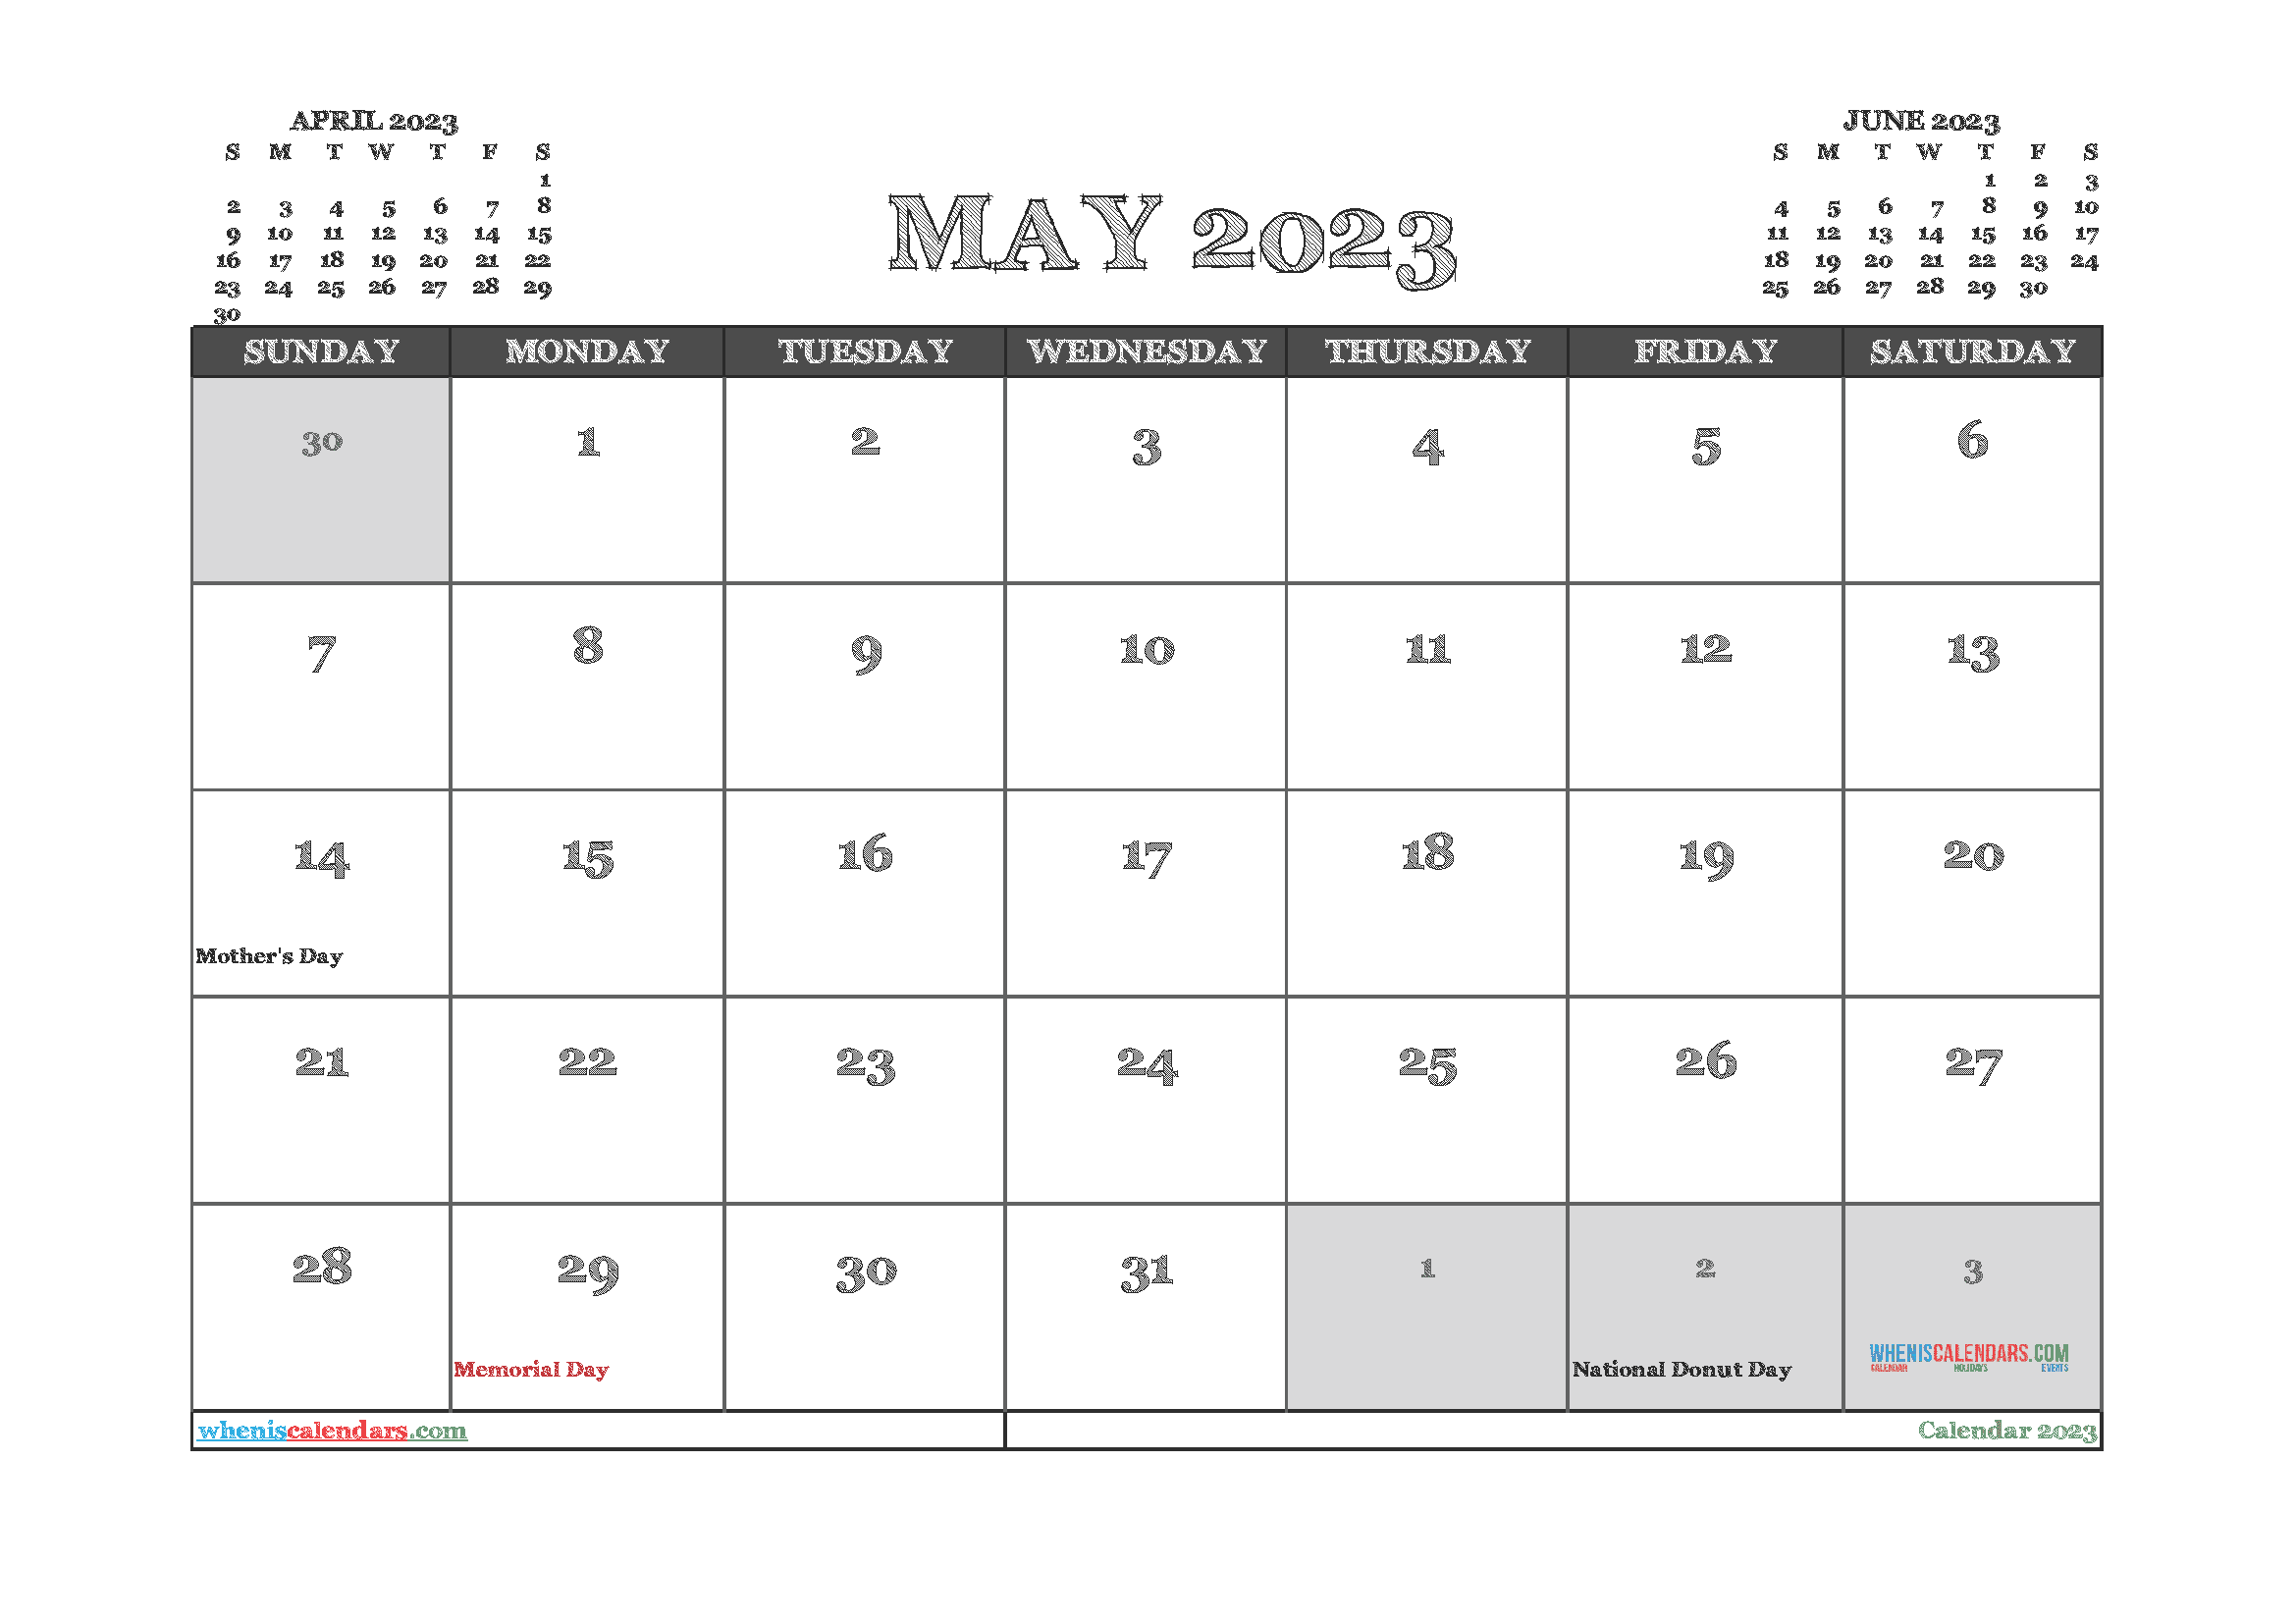 Free Printable Calendar May 2023 with Holidays PDF in Landscape